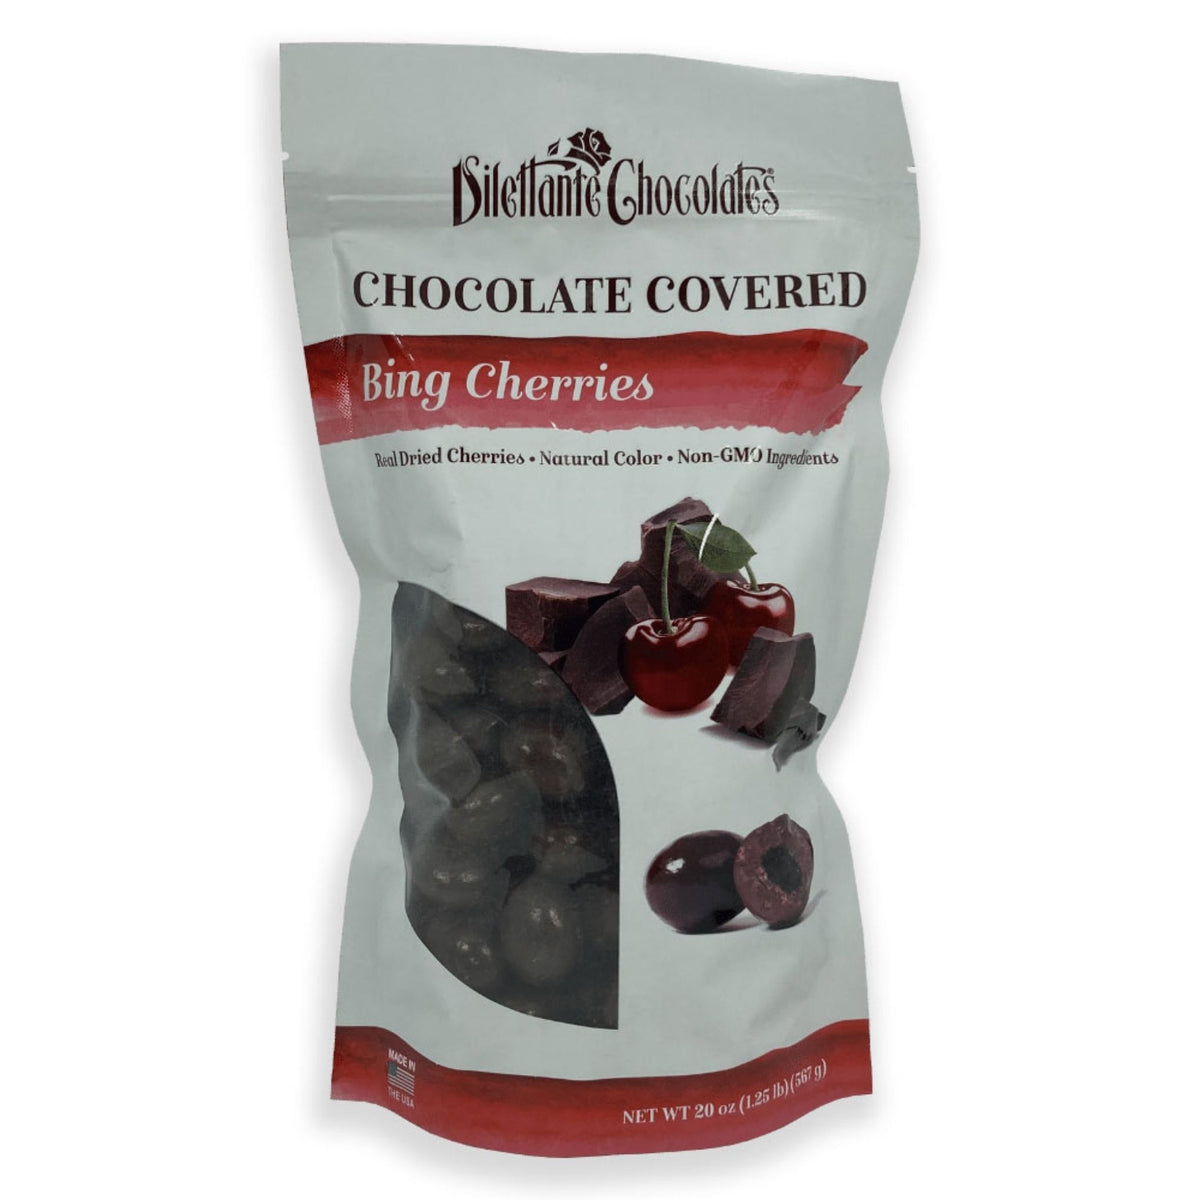 Dilettante Chocolates Chocolate-Covered Bing Cherries Made with Real Dried Cherries Natural Color and Non-GMO Ingredients